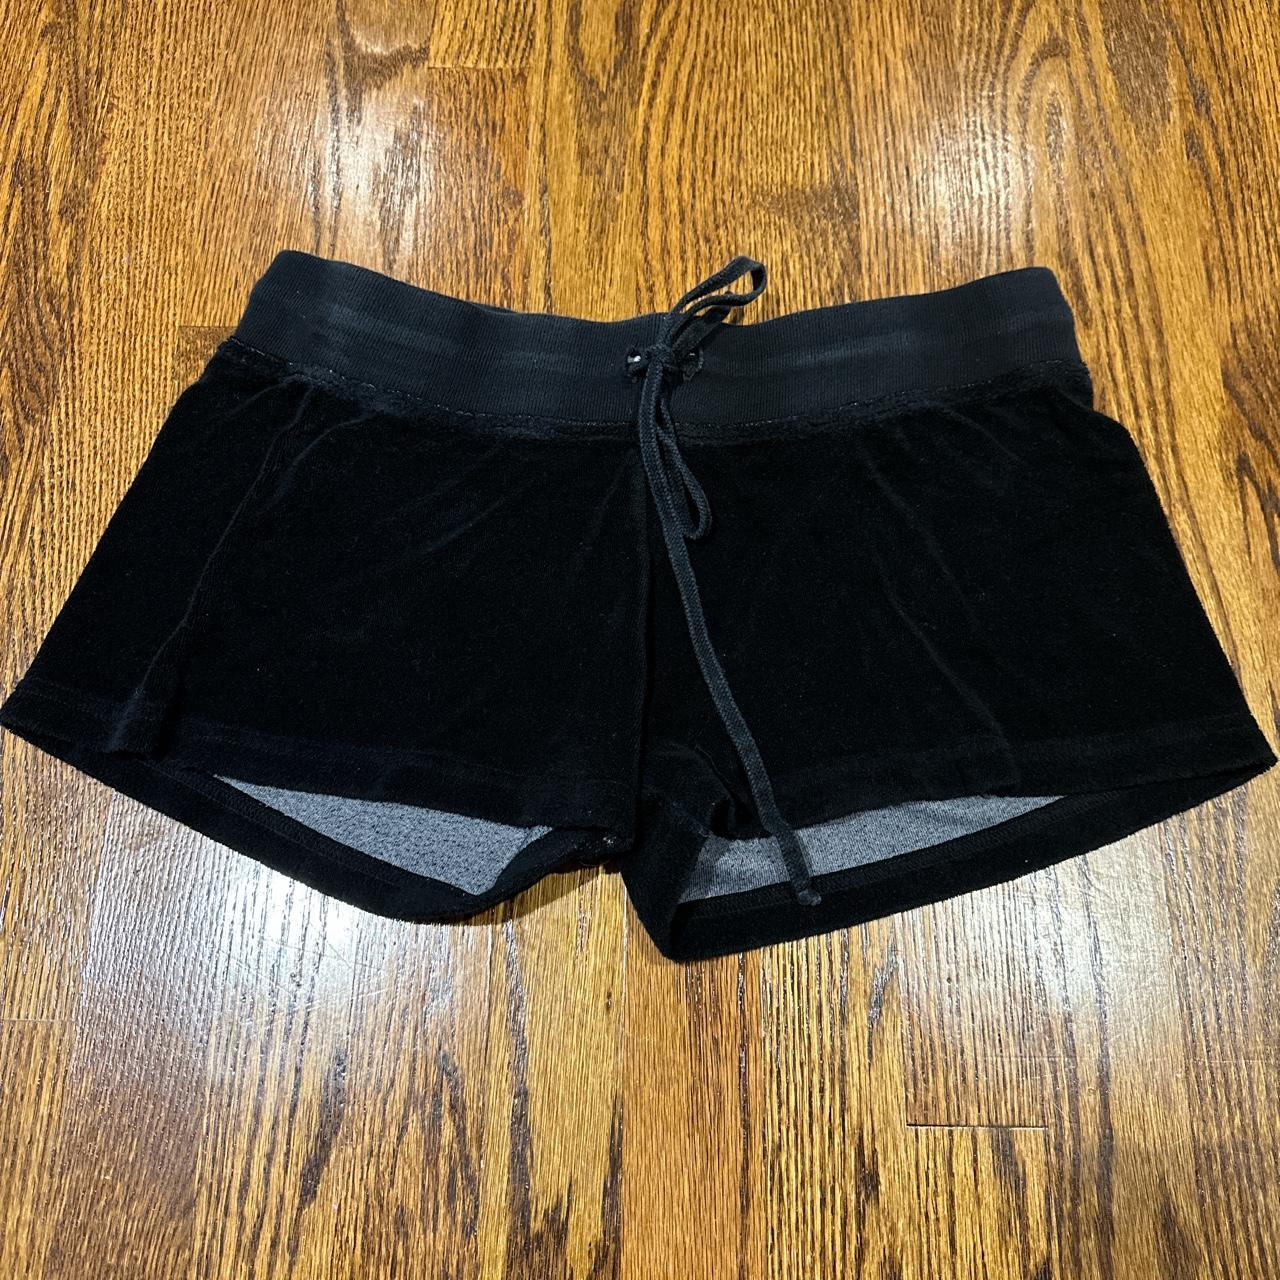 Hardtail brand terry cloth shorts, barely worn, size... - Depop